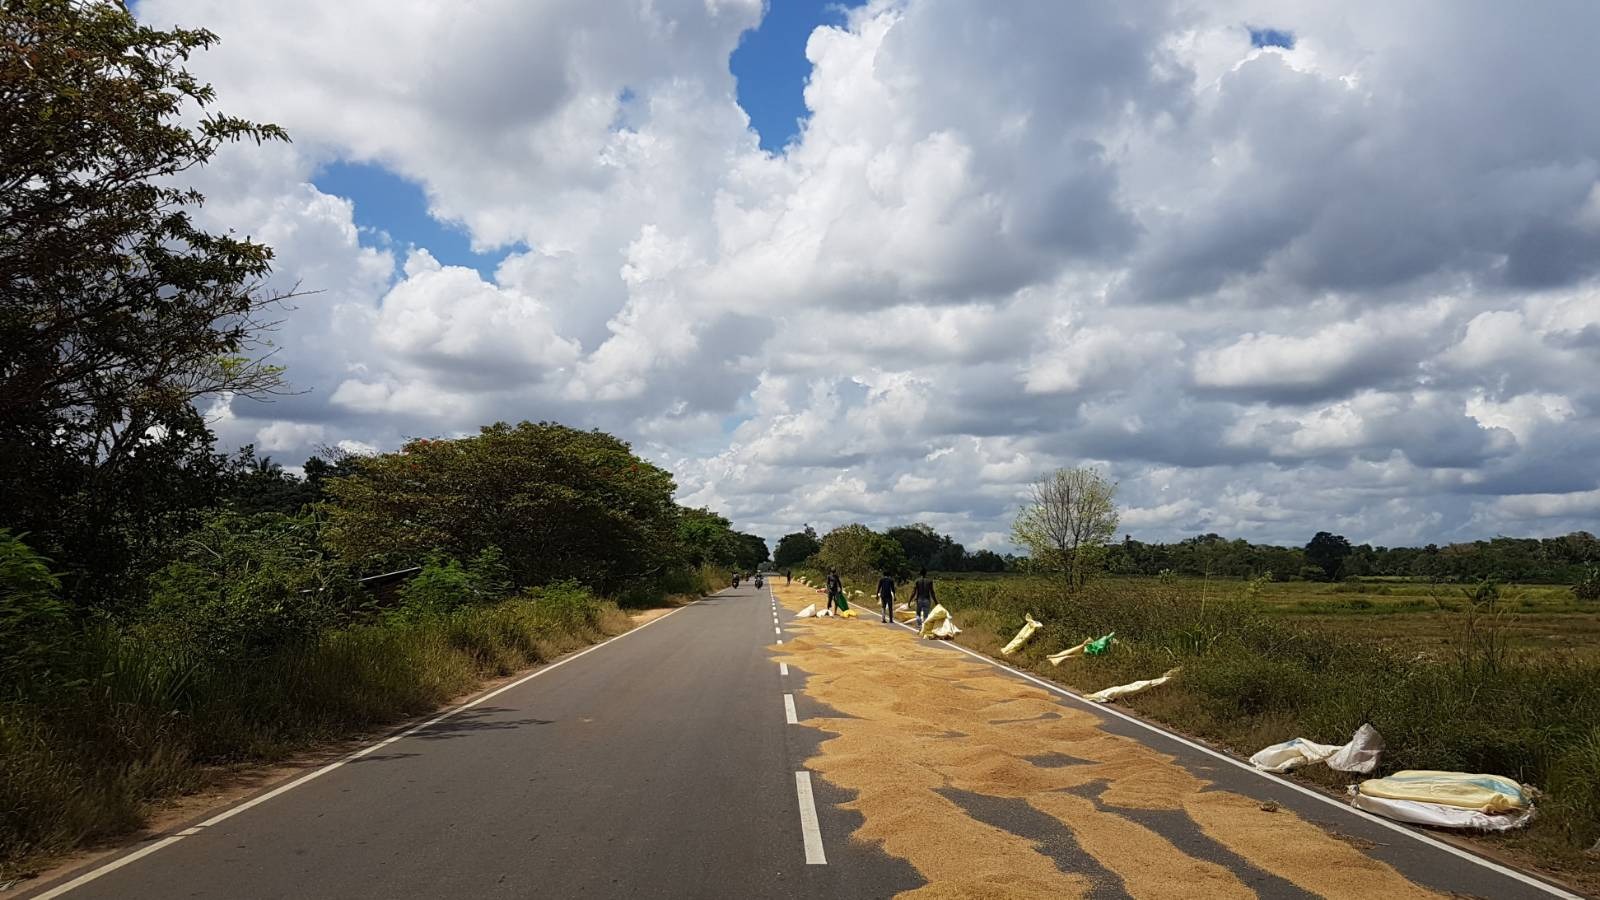 Rice laid out to dry on the long roads between Polonnaruwa and Medirigiriya. The yield has nearly halved in these areas.